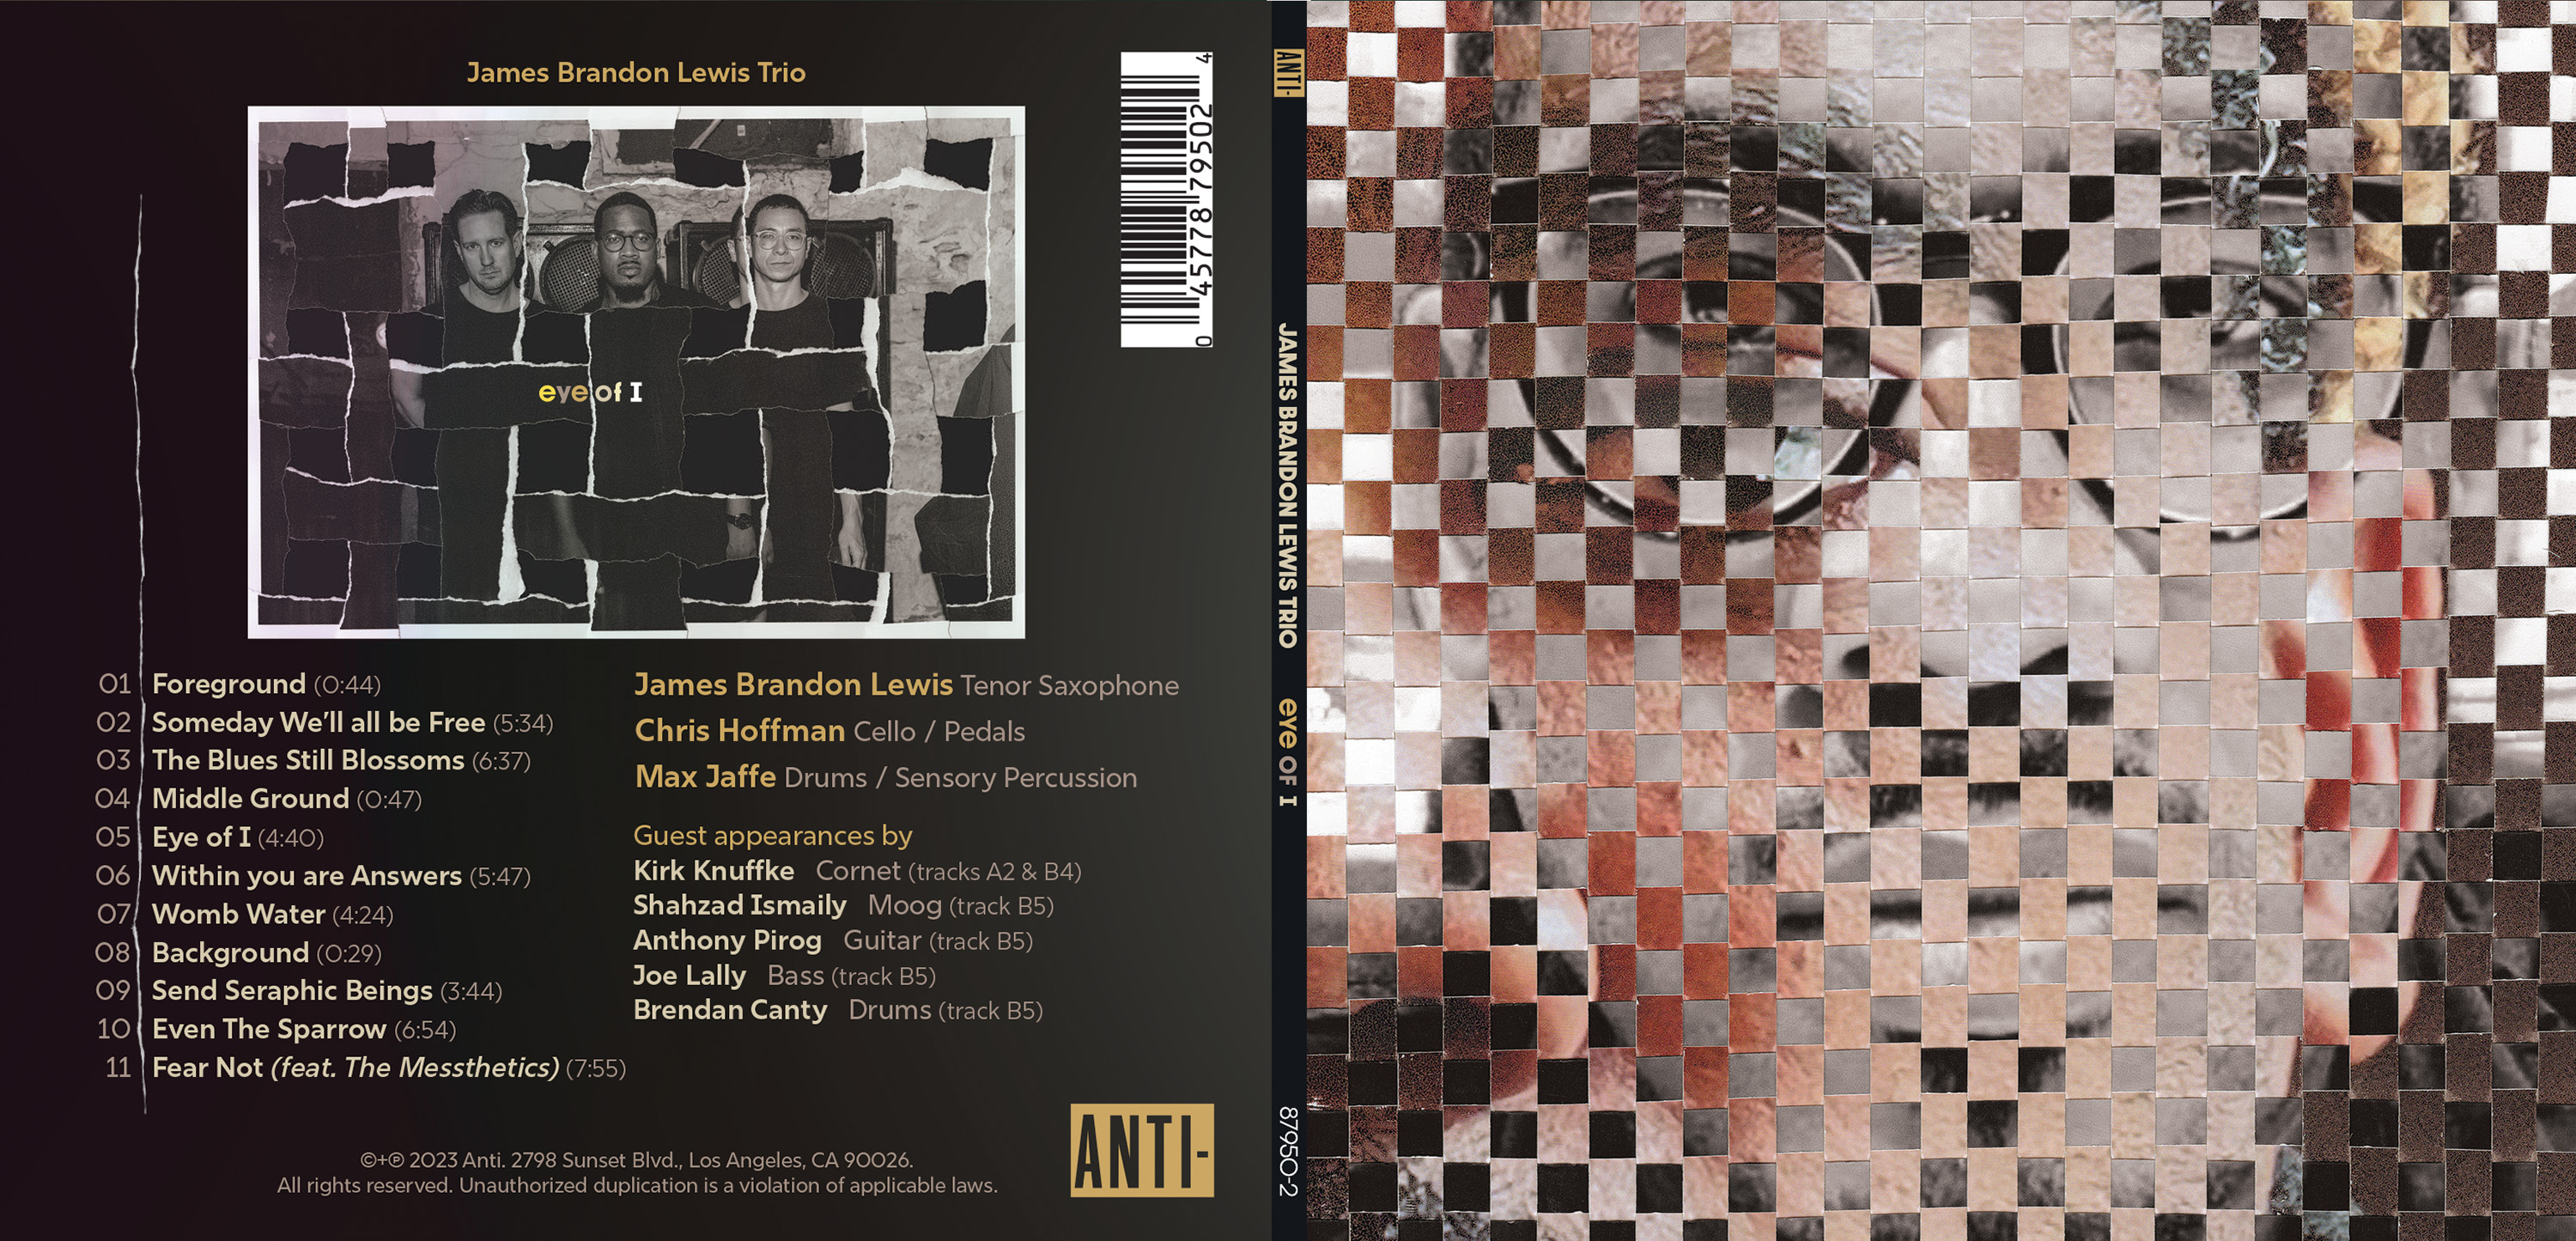 cd front (r) and back (l) cover for Eye of I by the James Brandon Lewis Trio